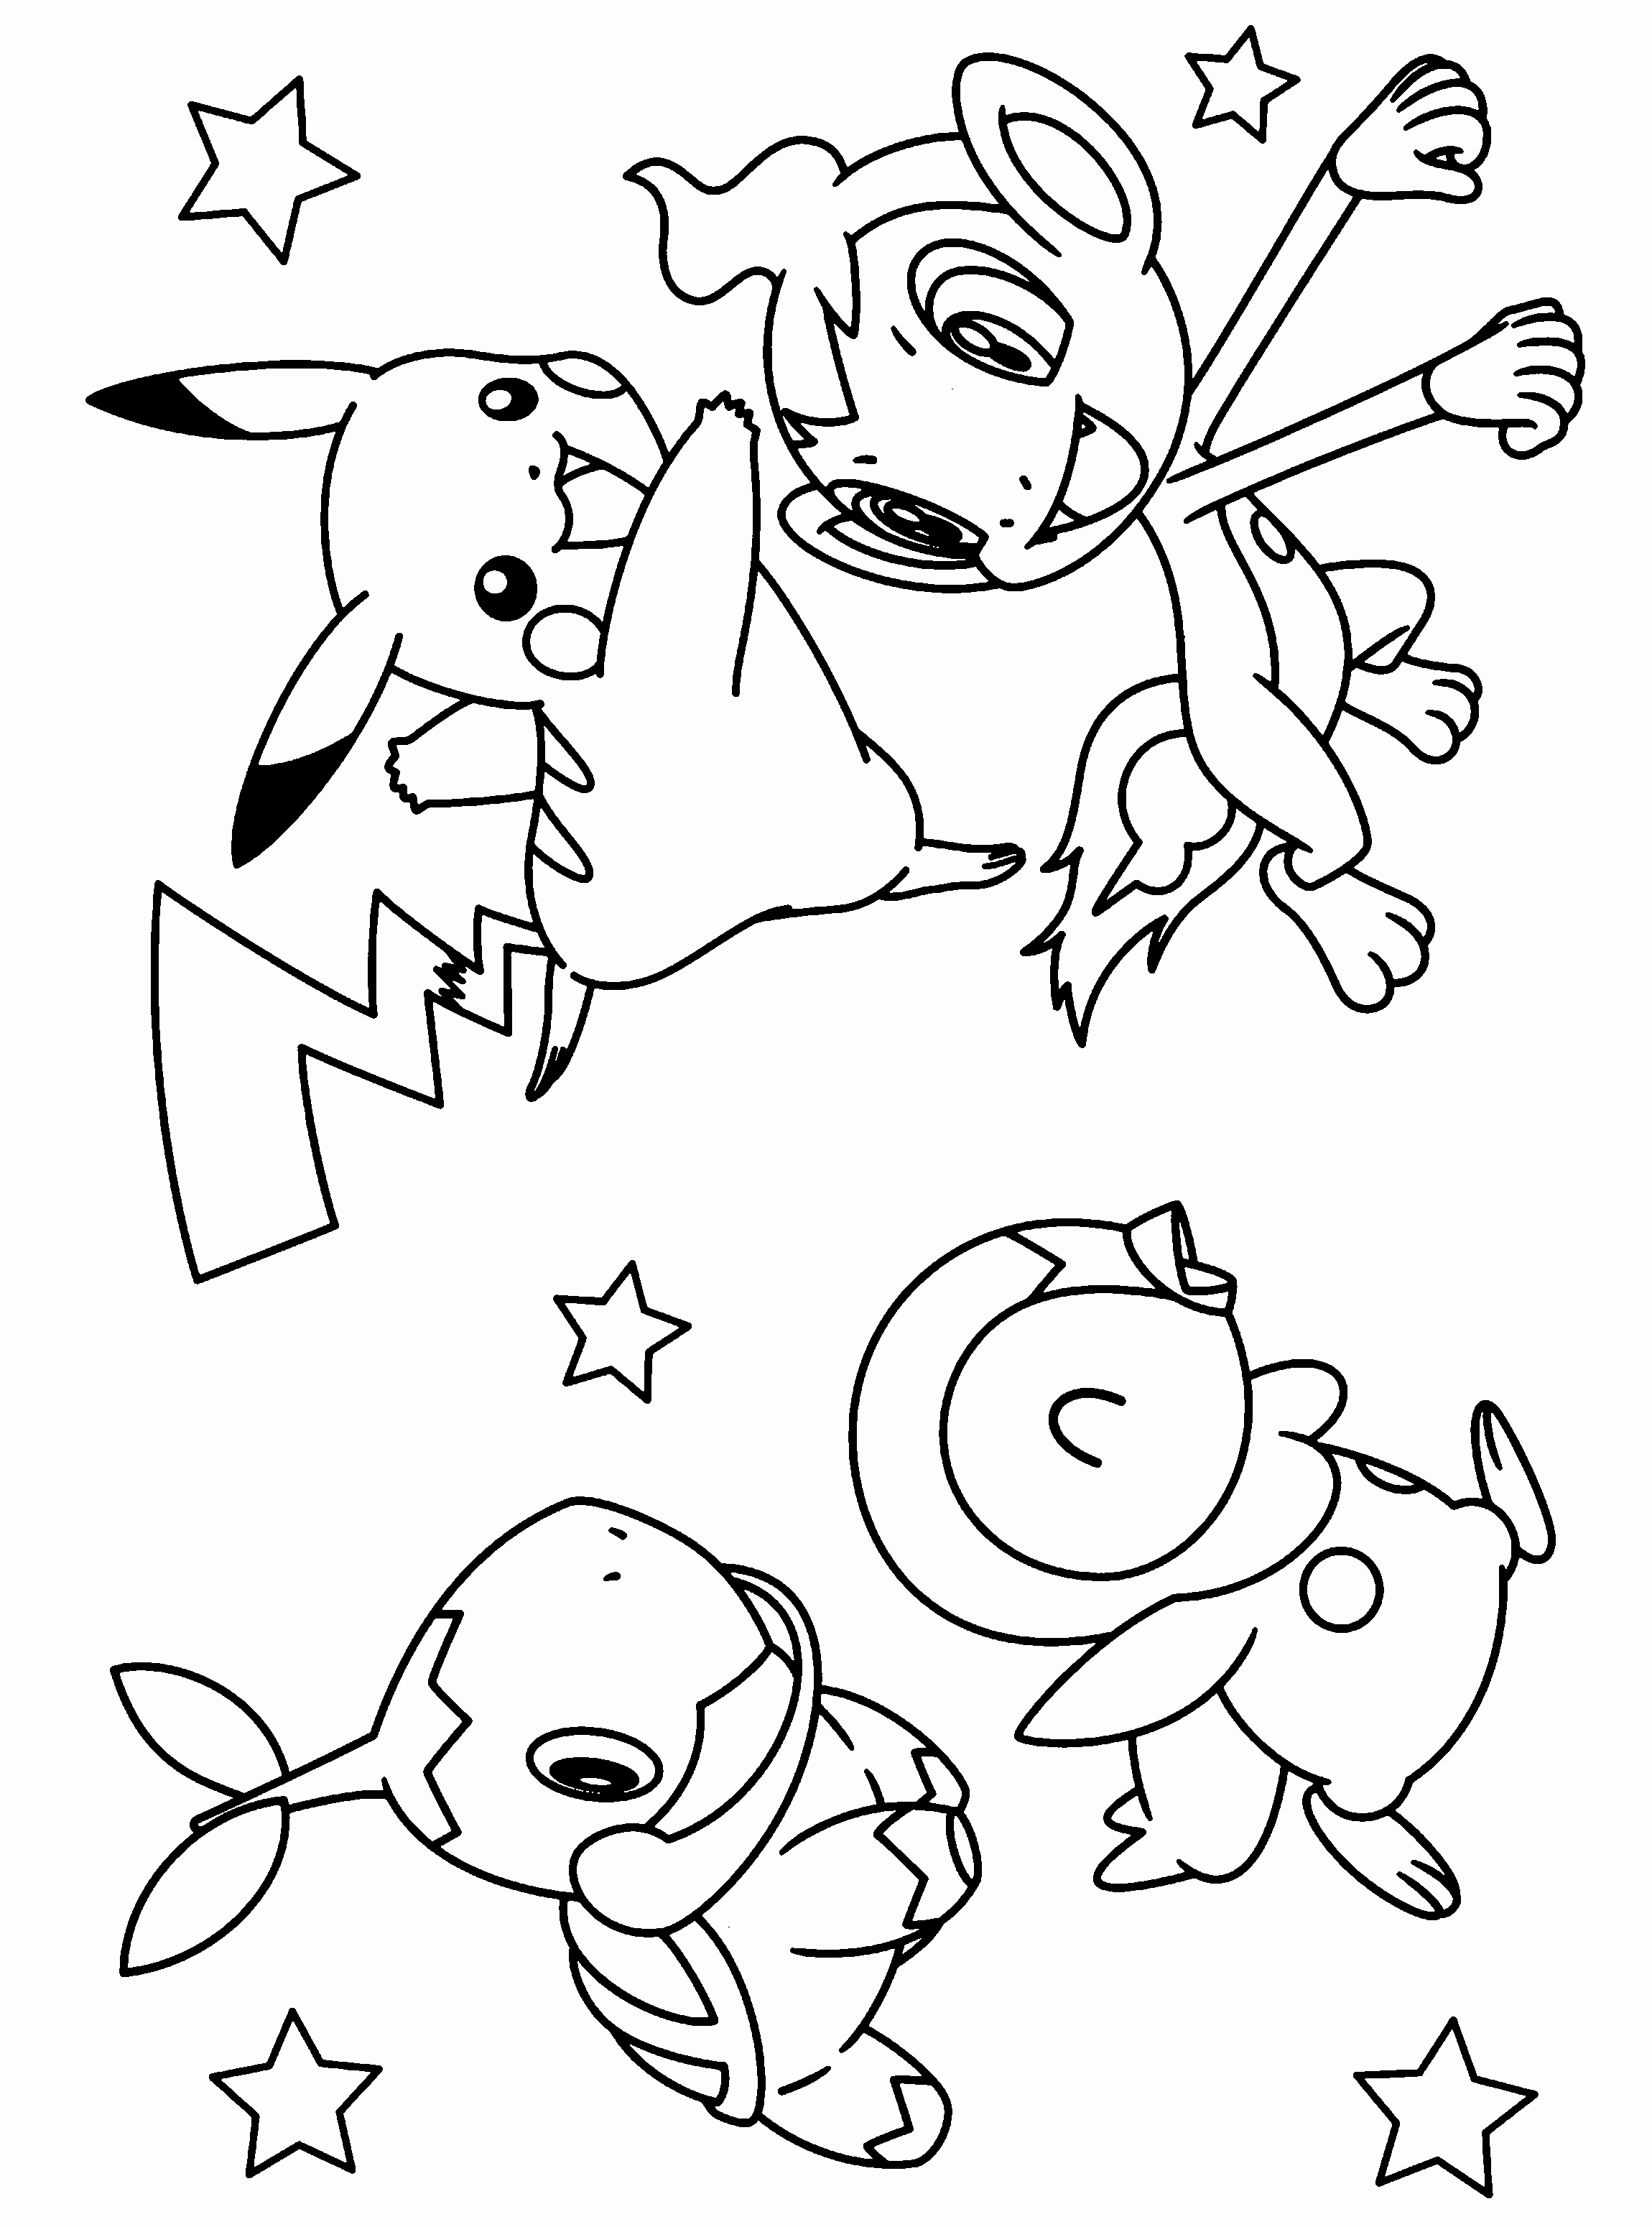 Free Printable Pokemon Pictures Lovely Pokemon Coloring Pages